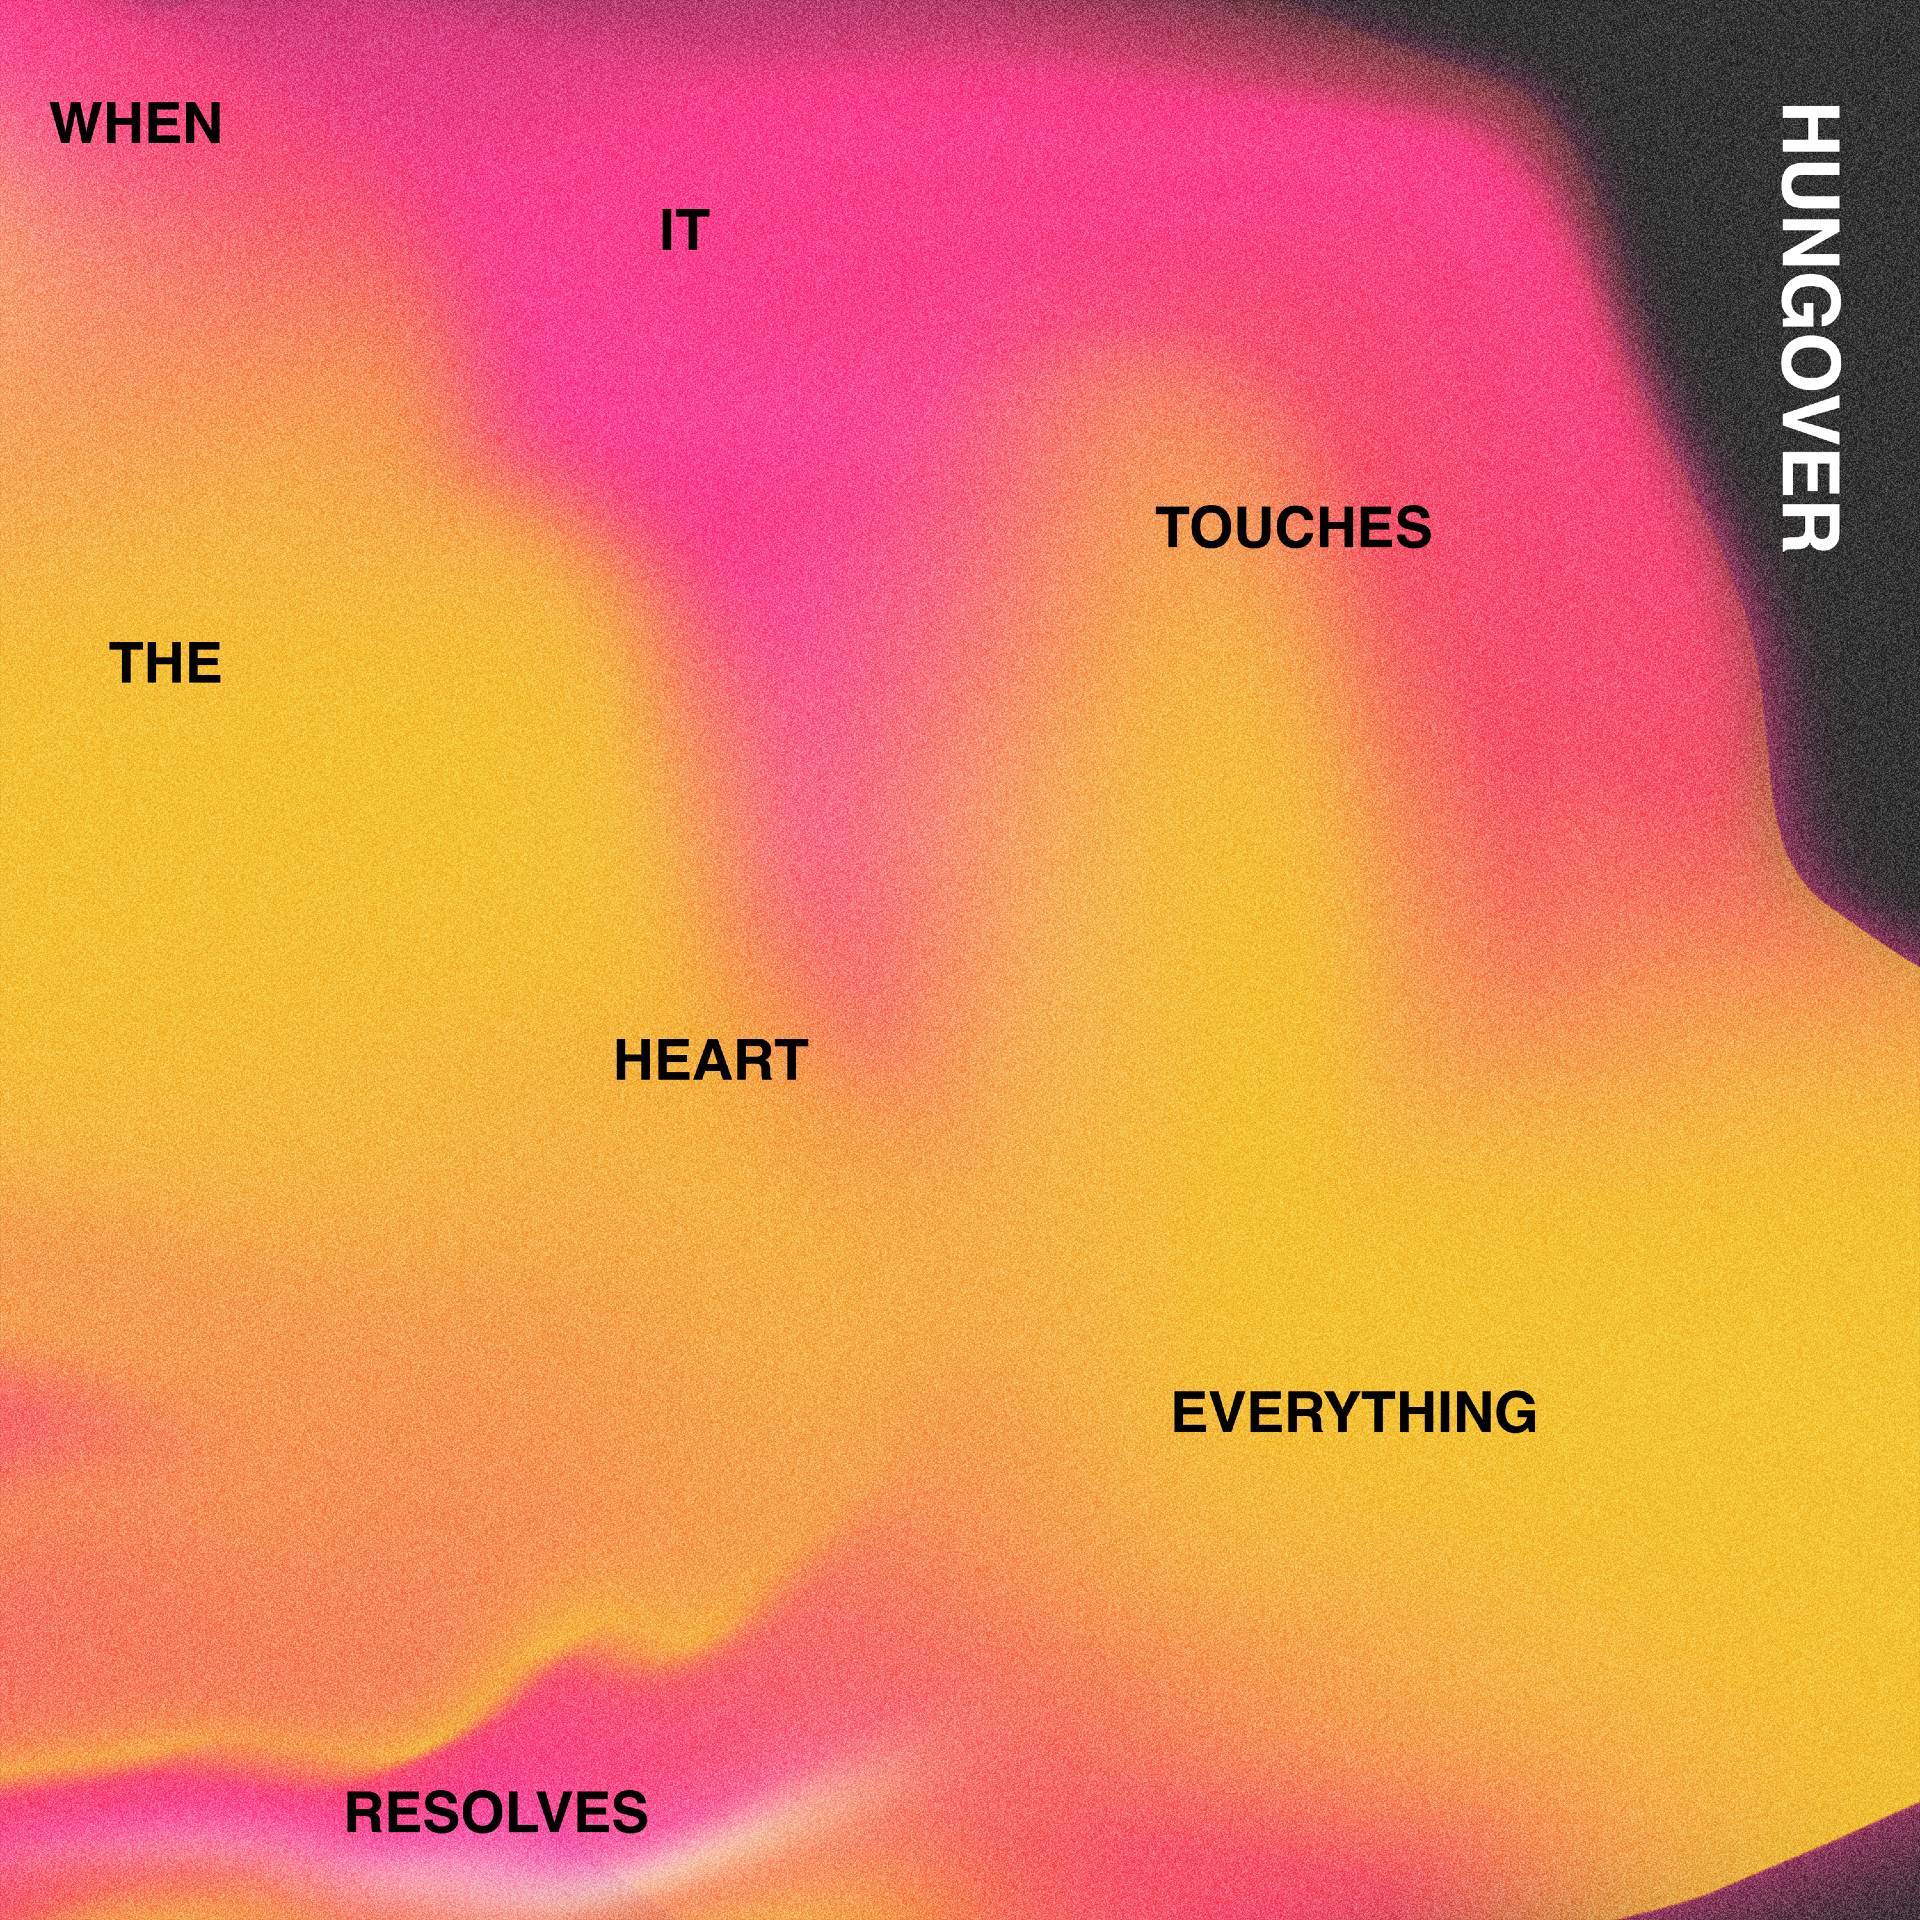 Hungover ‘When it Touches the Heart, Everything Resolves’ album artwork